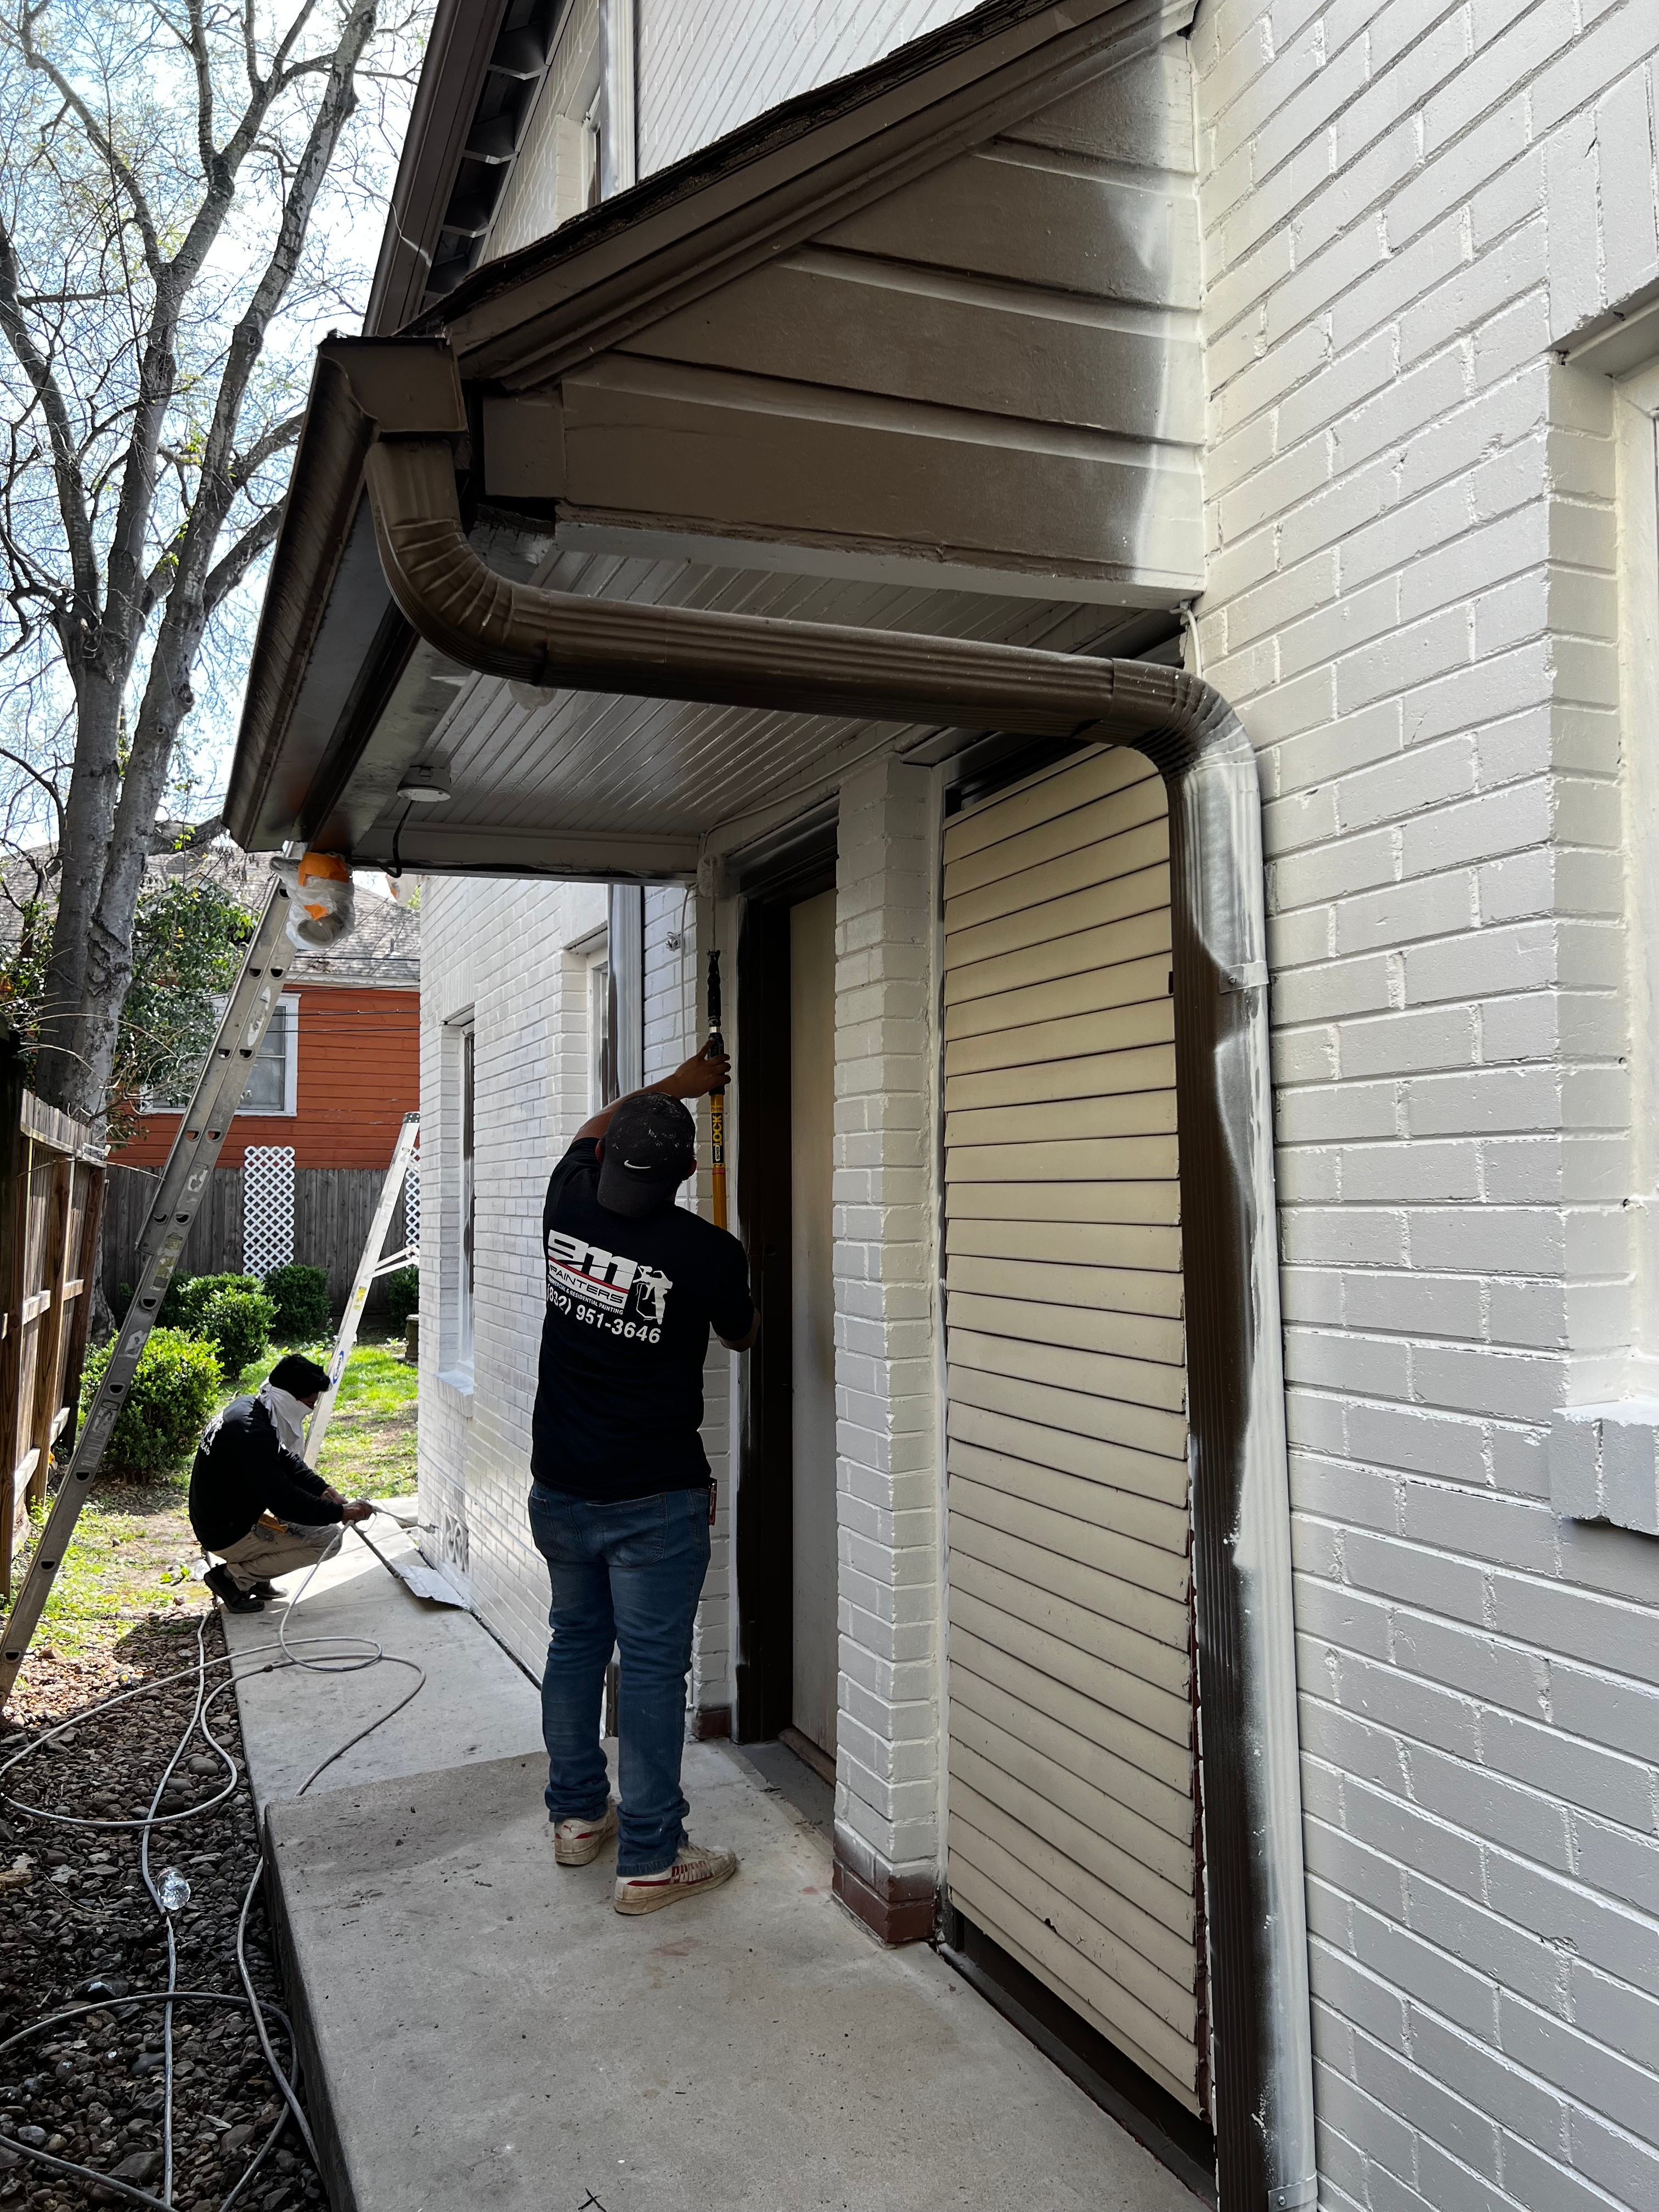 Exterior Painting for 911 Painters in Houston, TX